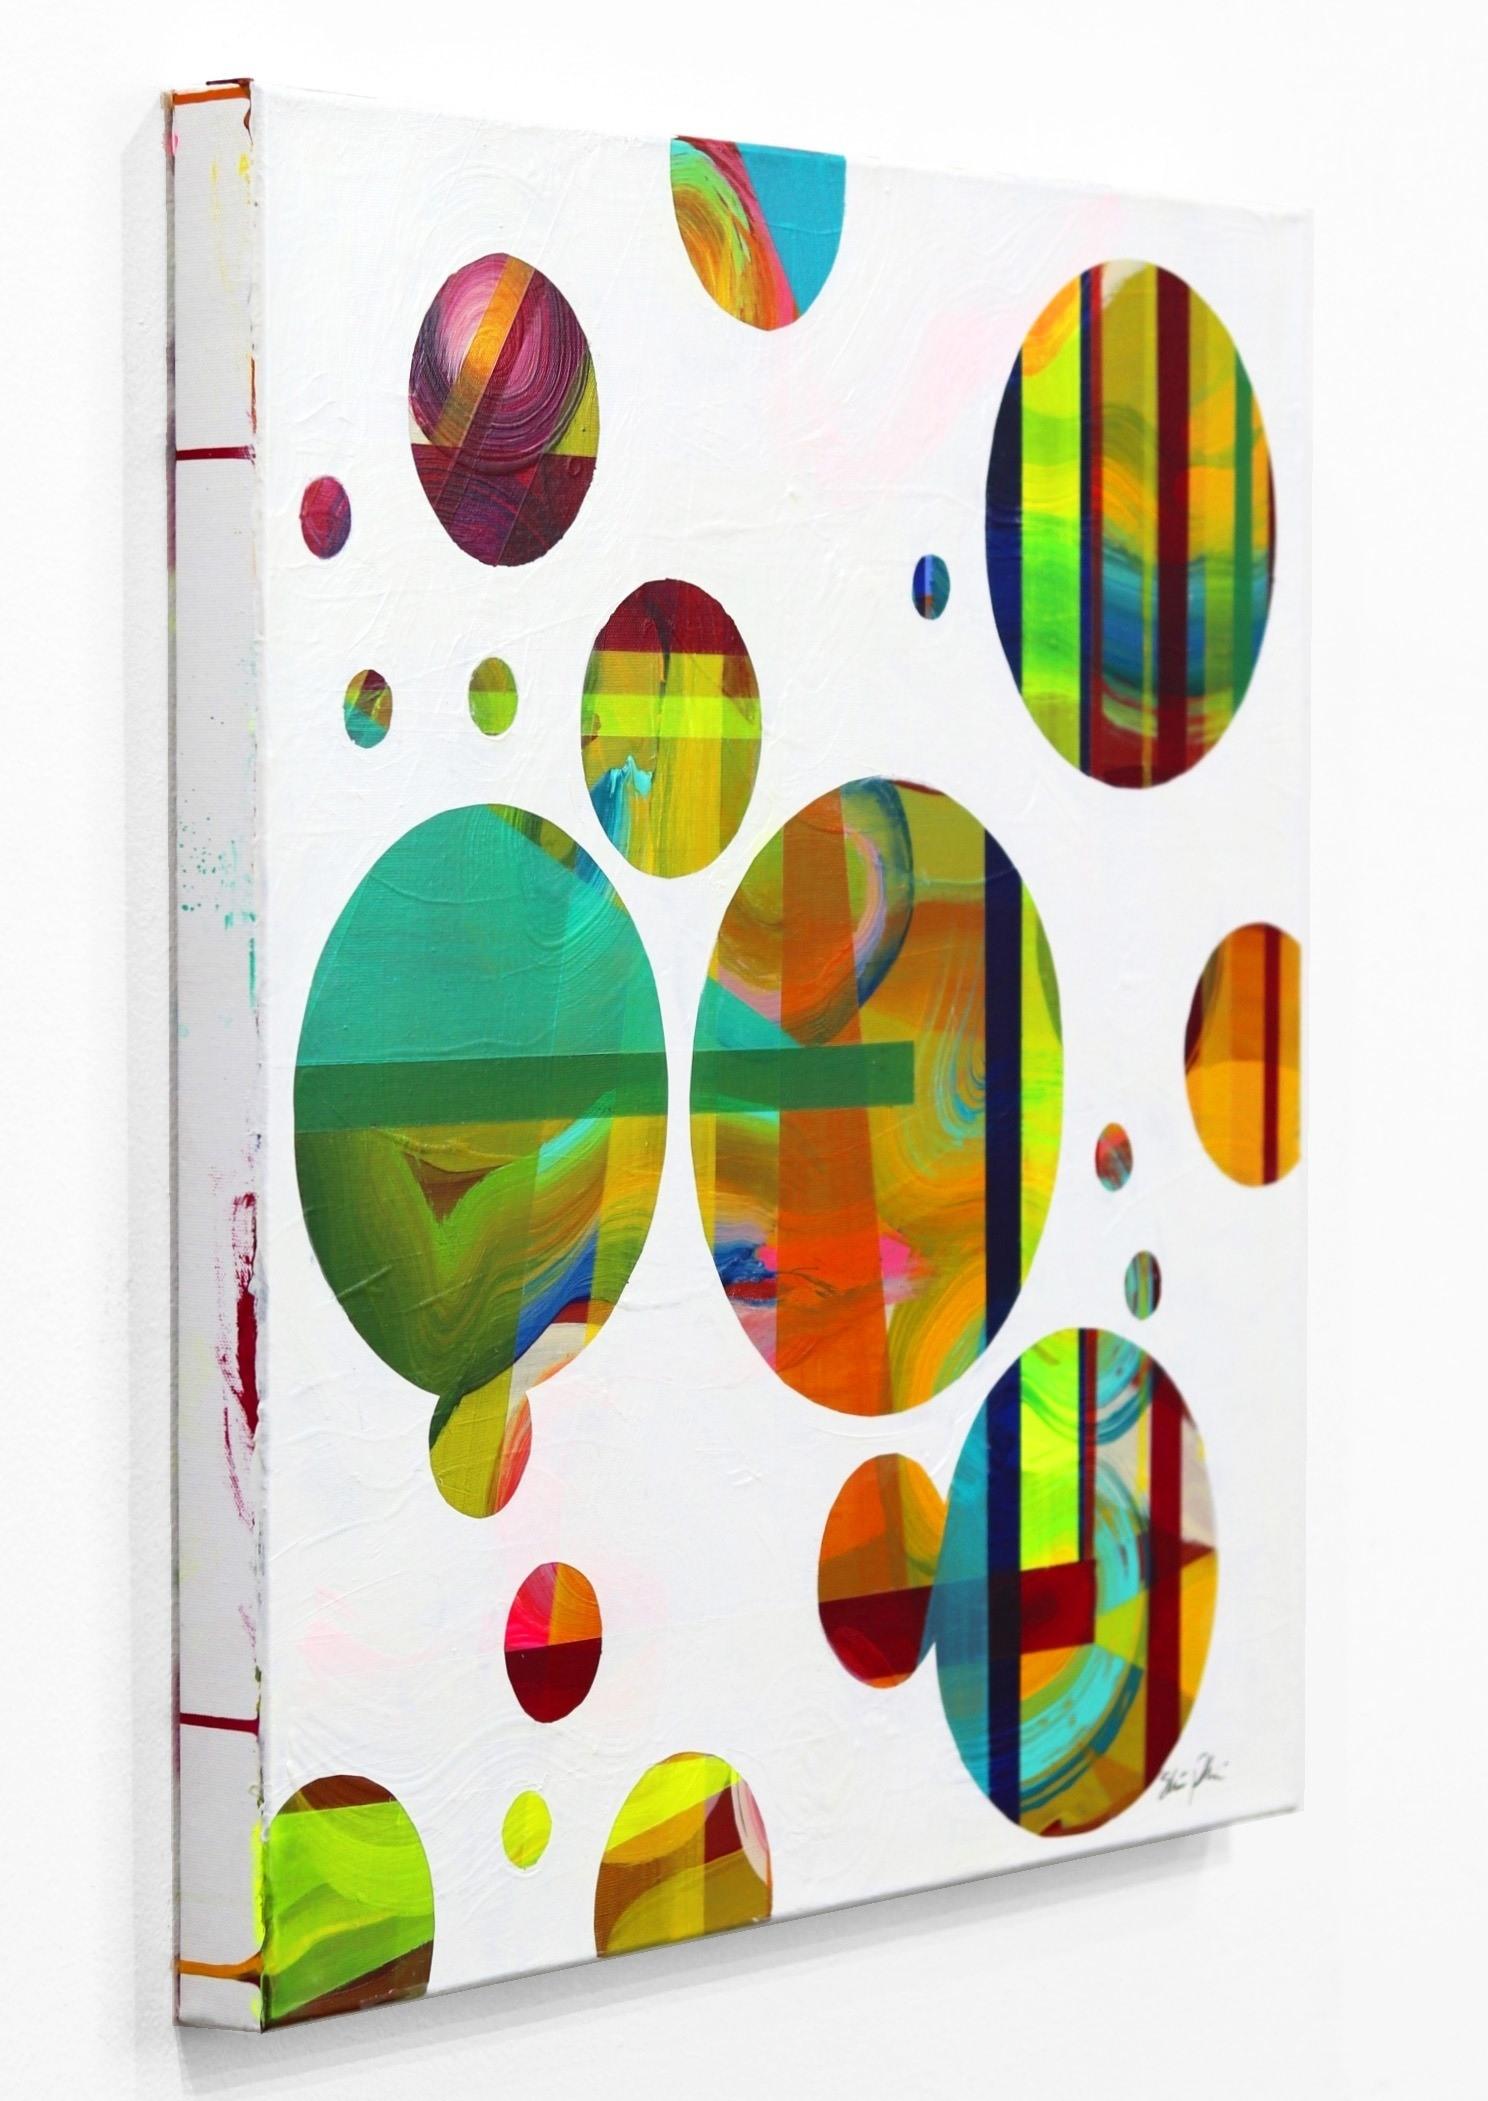 Reflections No. 3 - Geometric Colorful Abstract Art - White Abstract Painting by Shiri Phillips